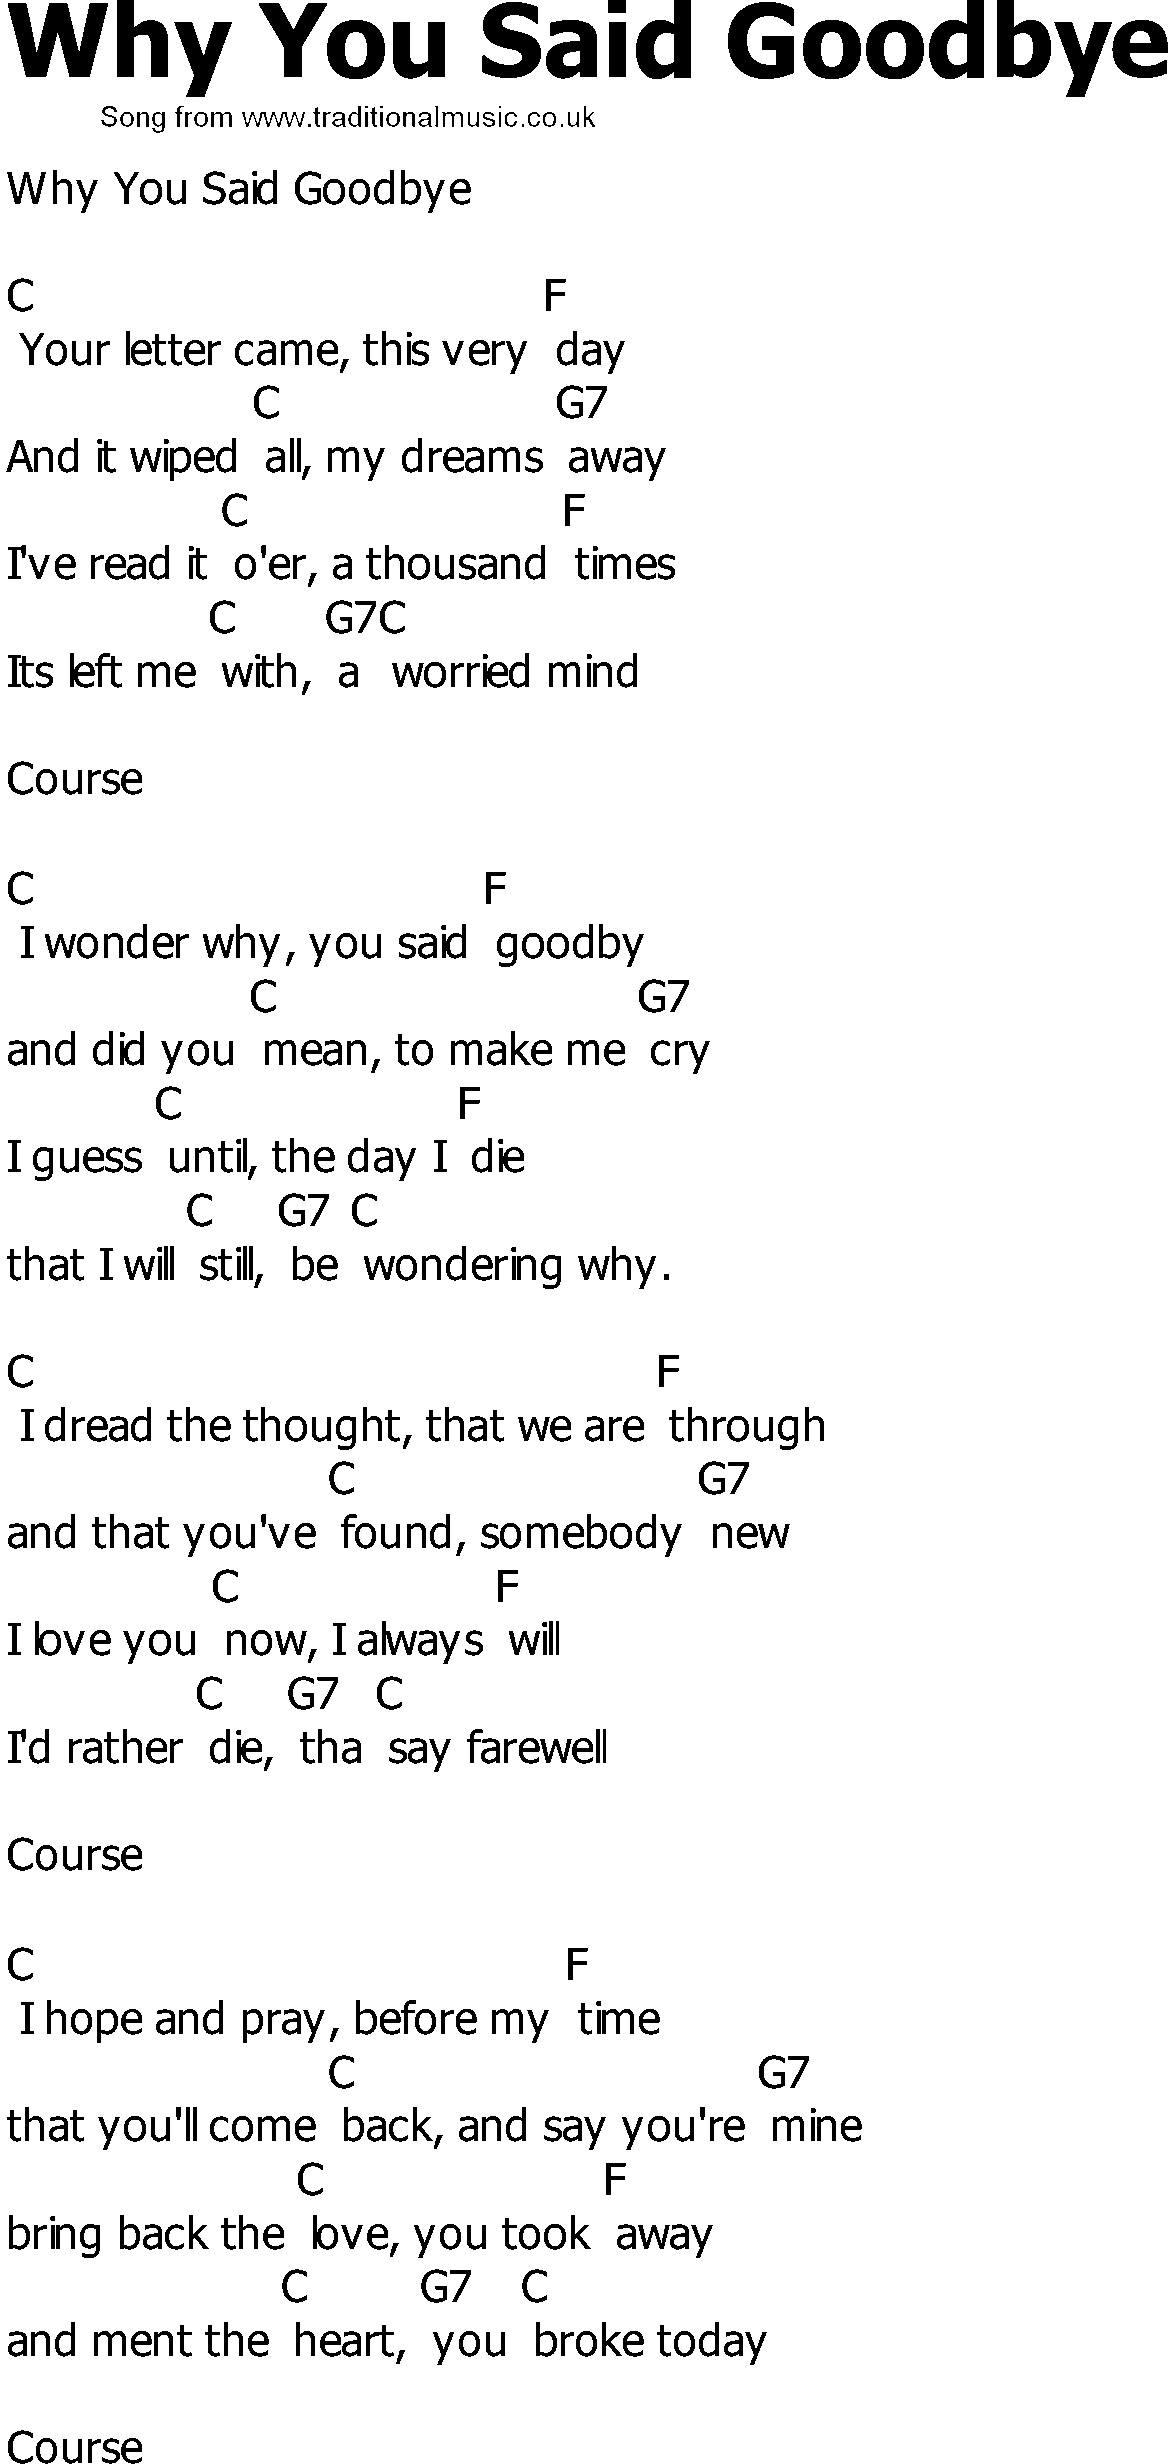 Old Country song lyrics with chords - Why You Said Goodbye